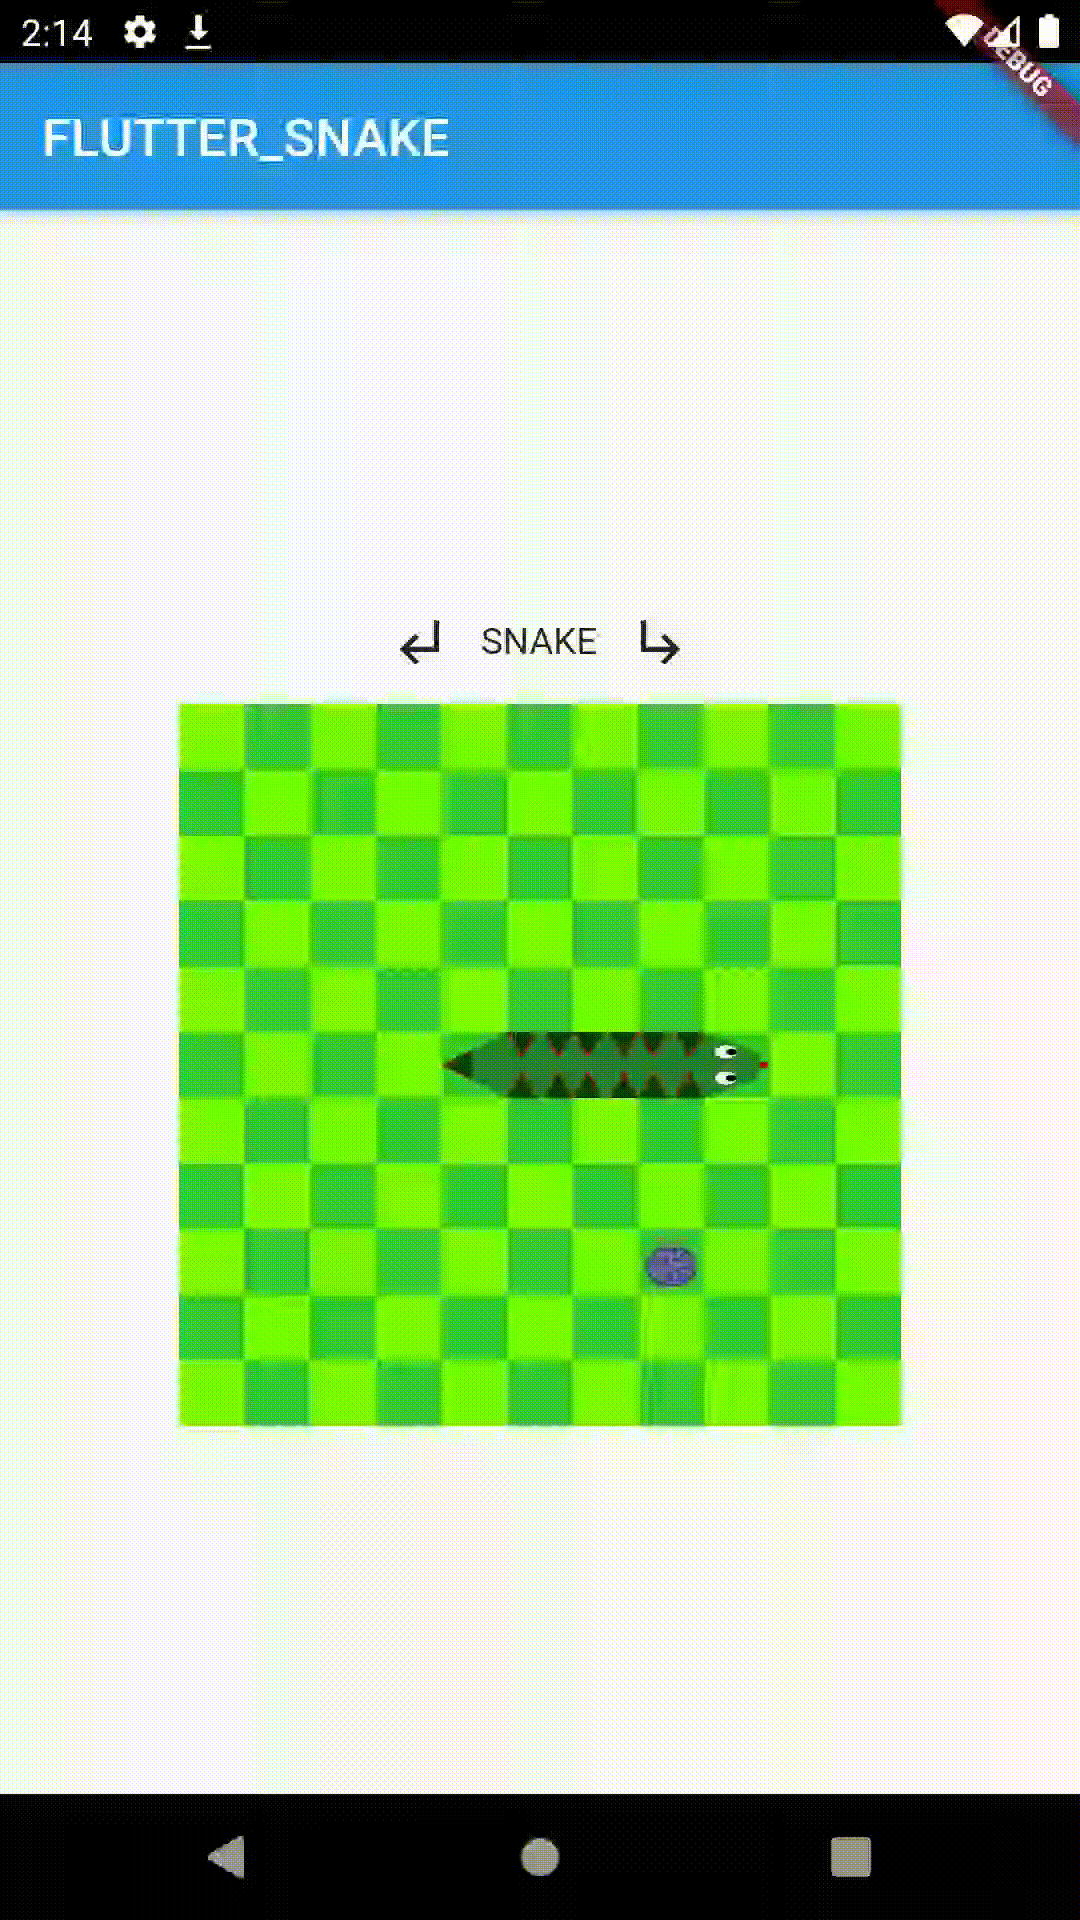 A gif showing the snake in movement